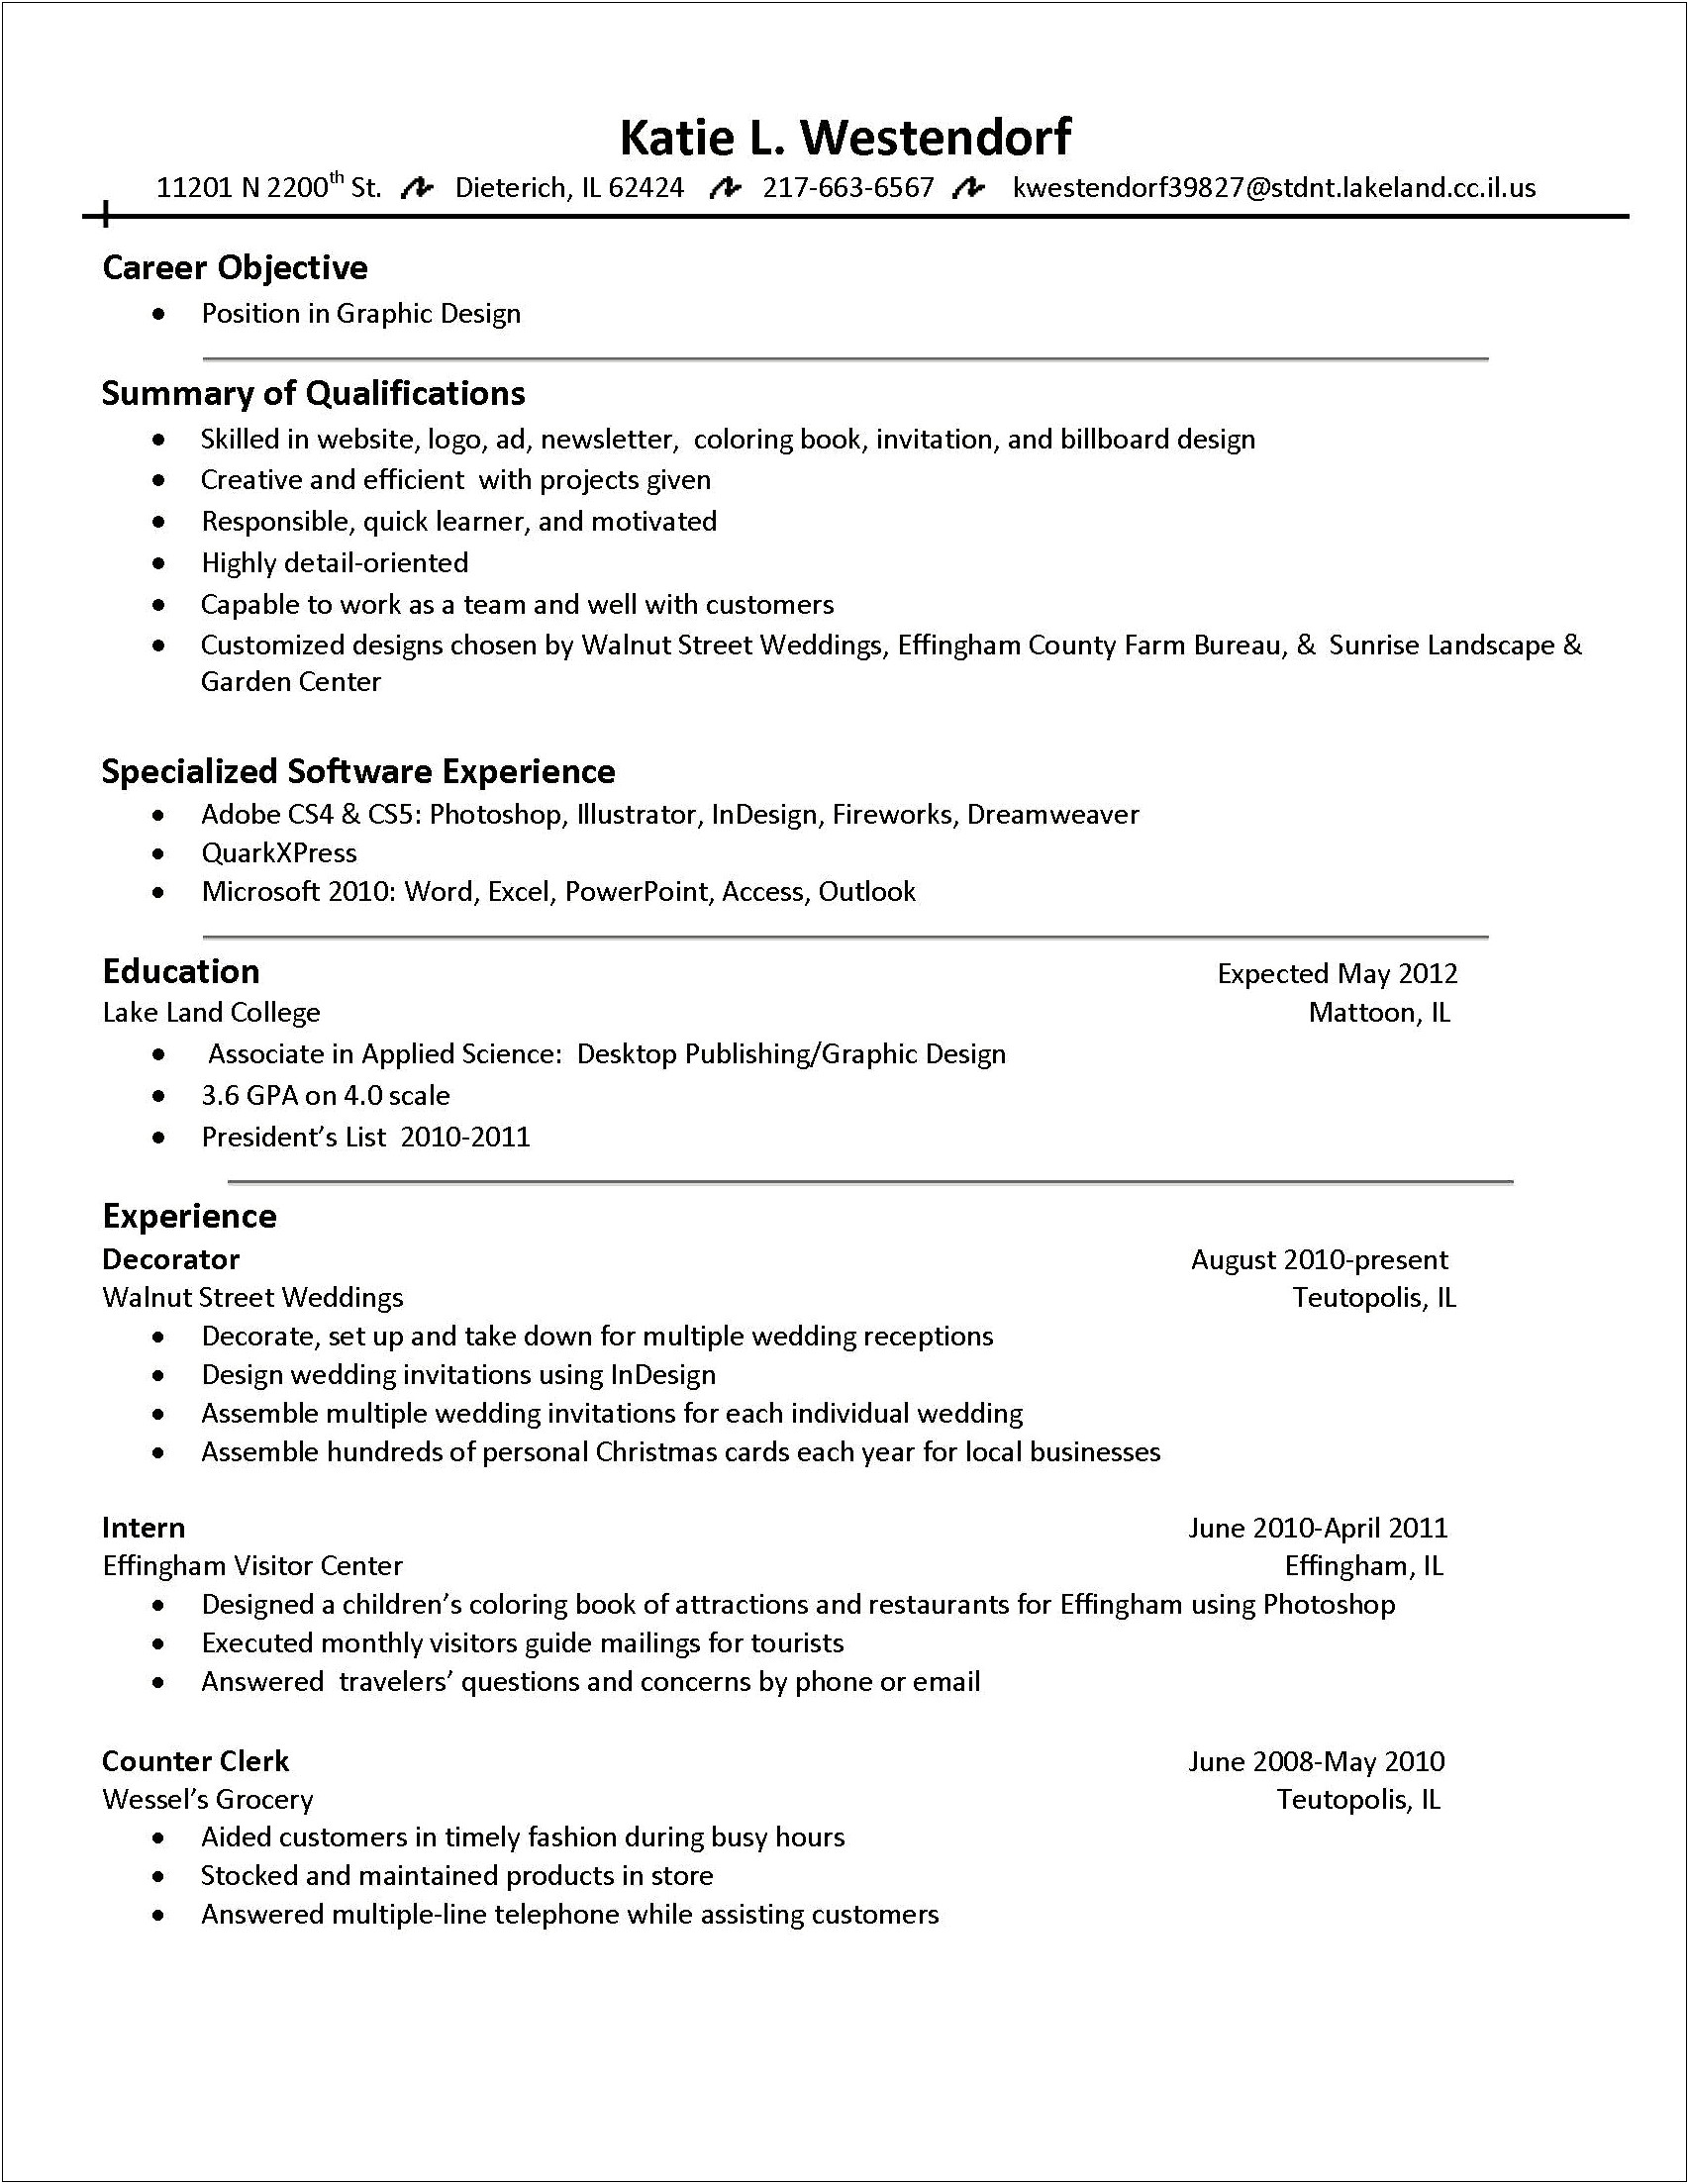 Having Words On Two Lines In A Resume